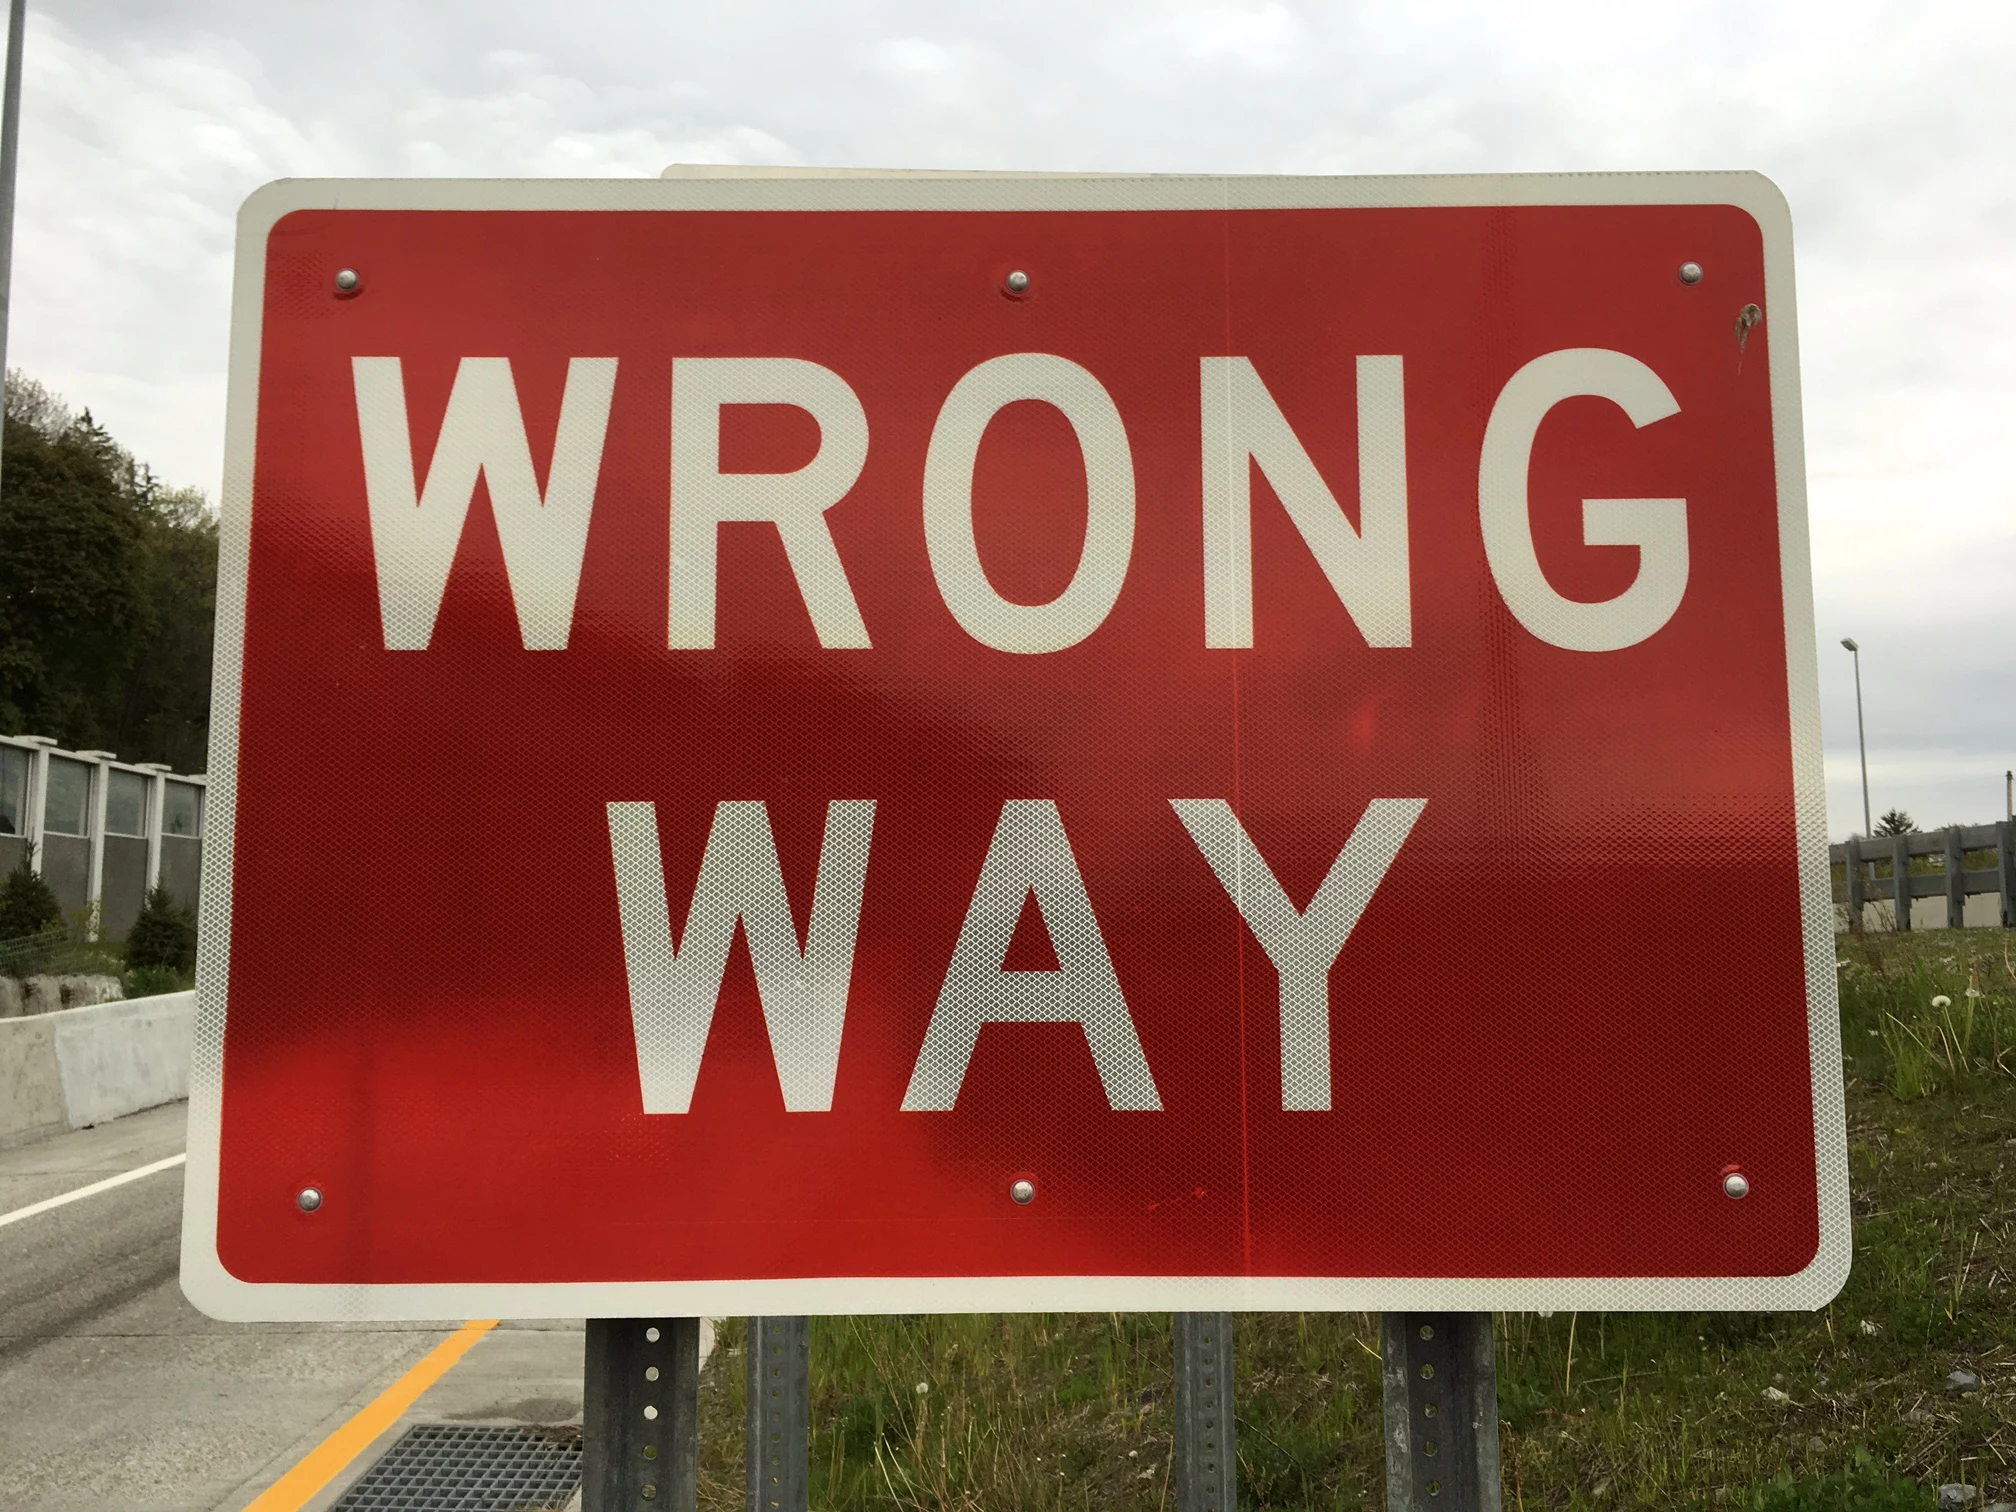 5 Logical Reasons Why We Drive On The Right Side of the Road pic